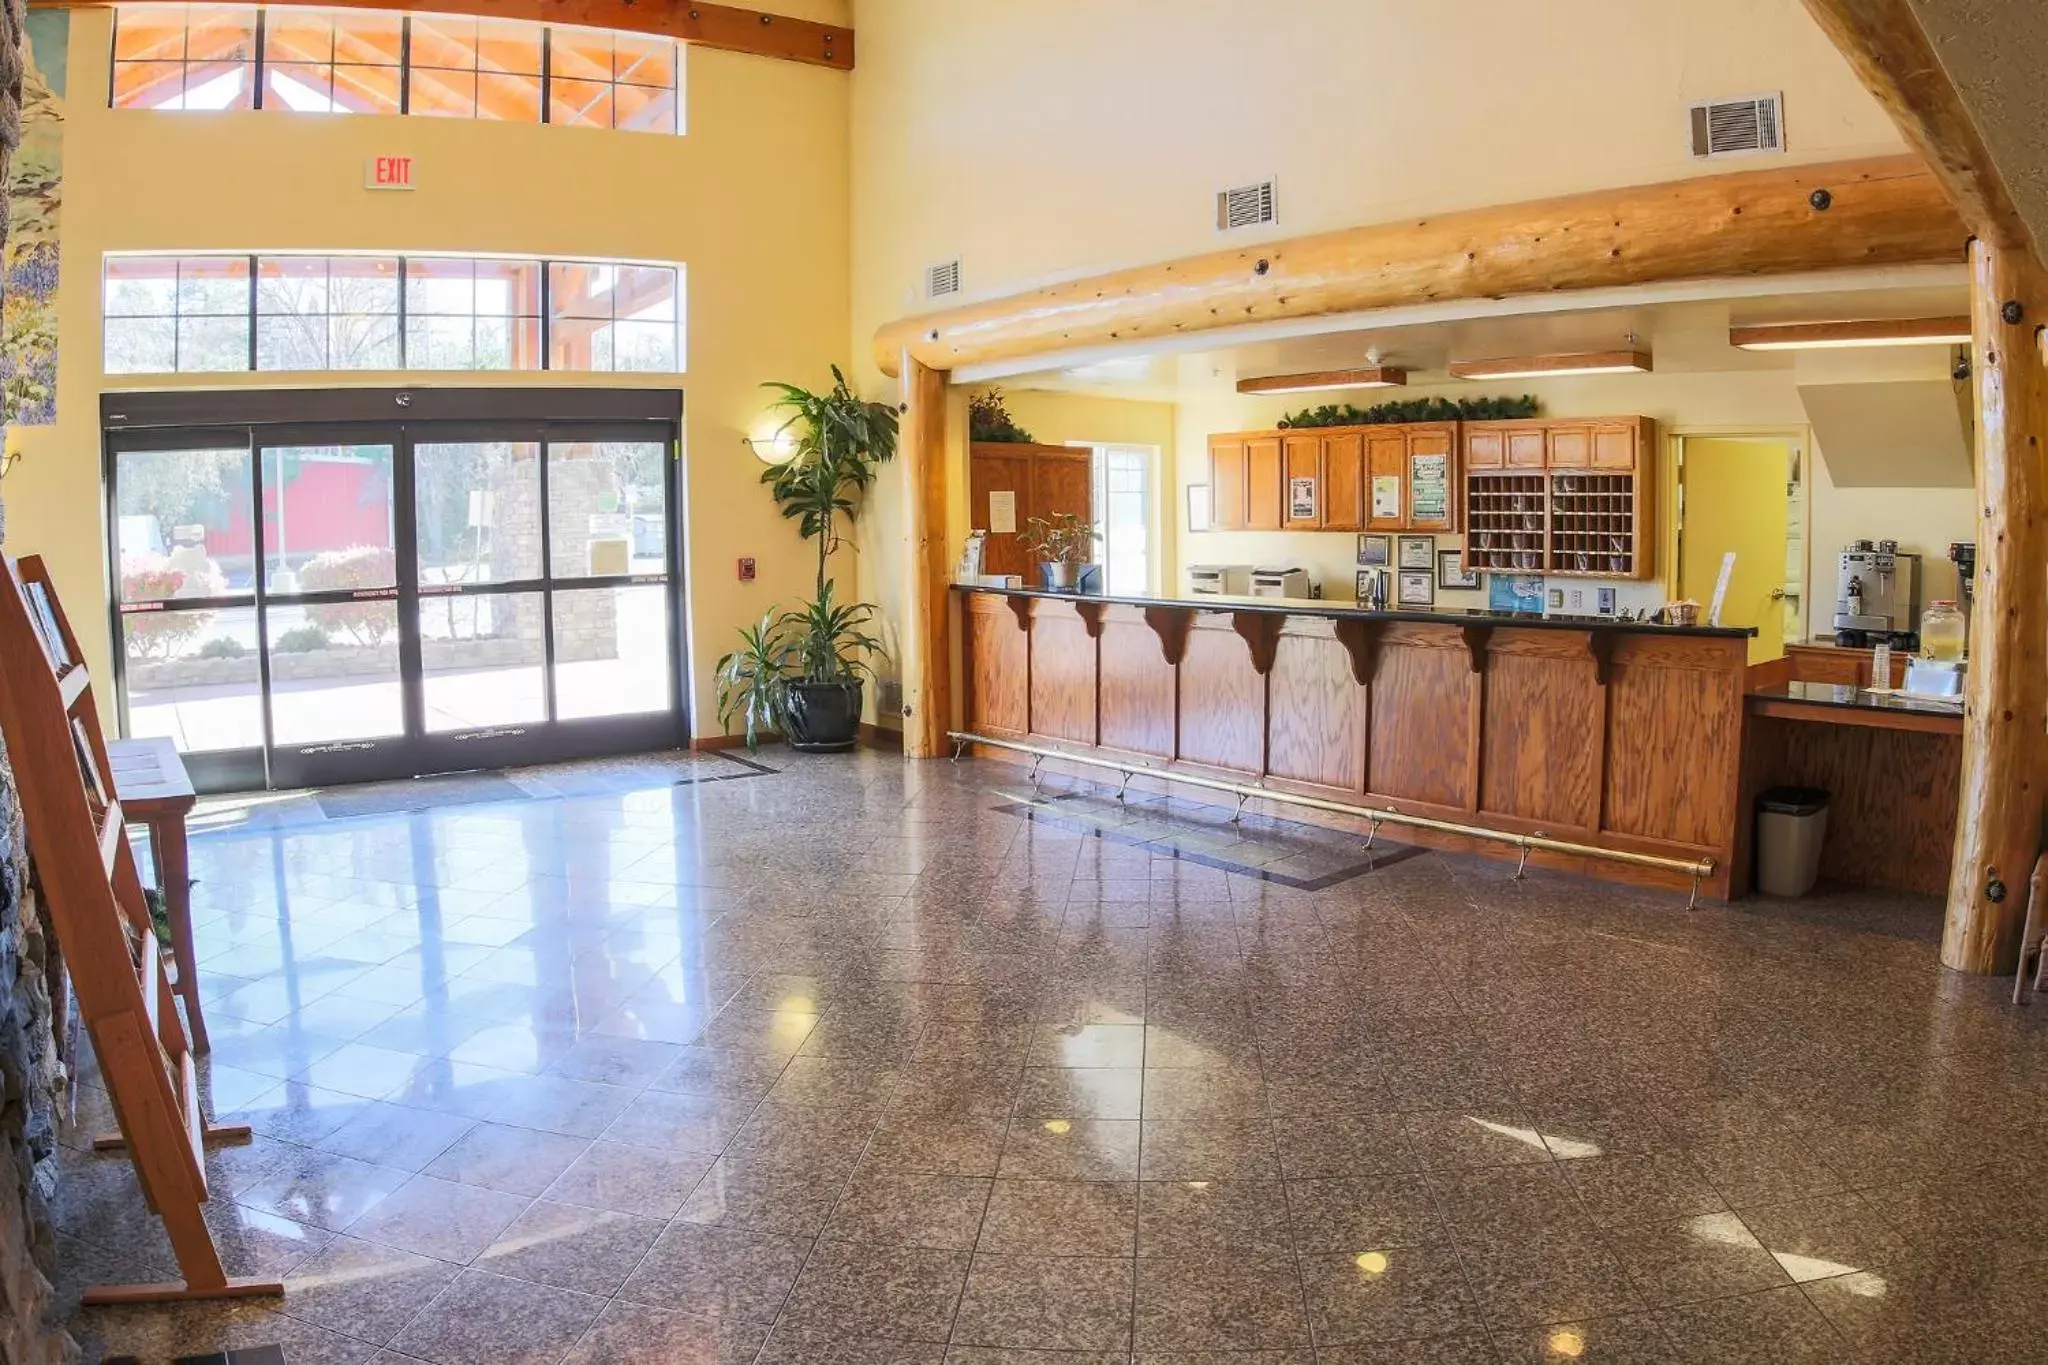 Lobby or reception in Murphys Suites